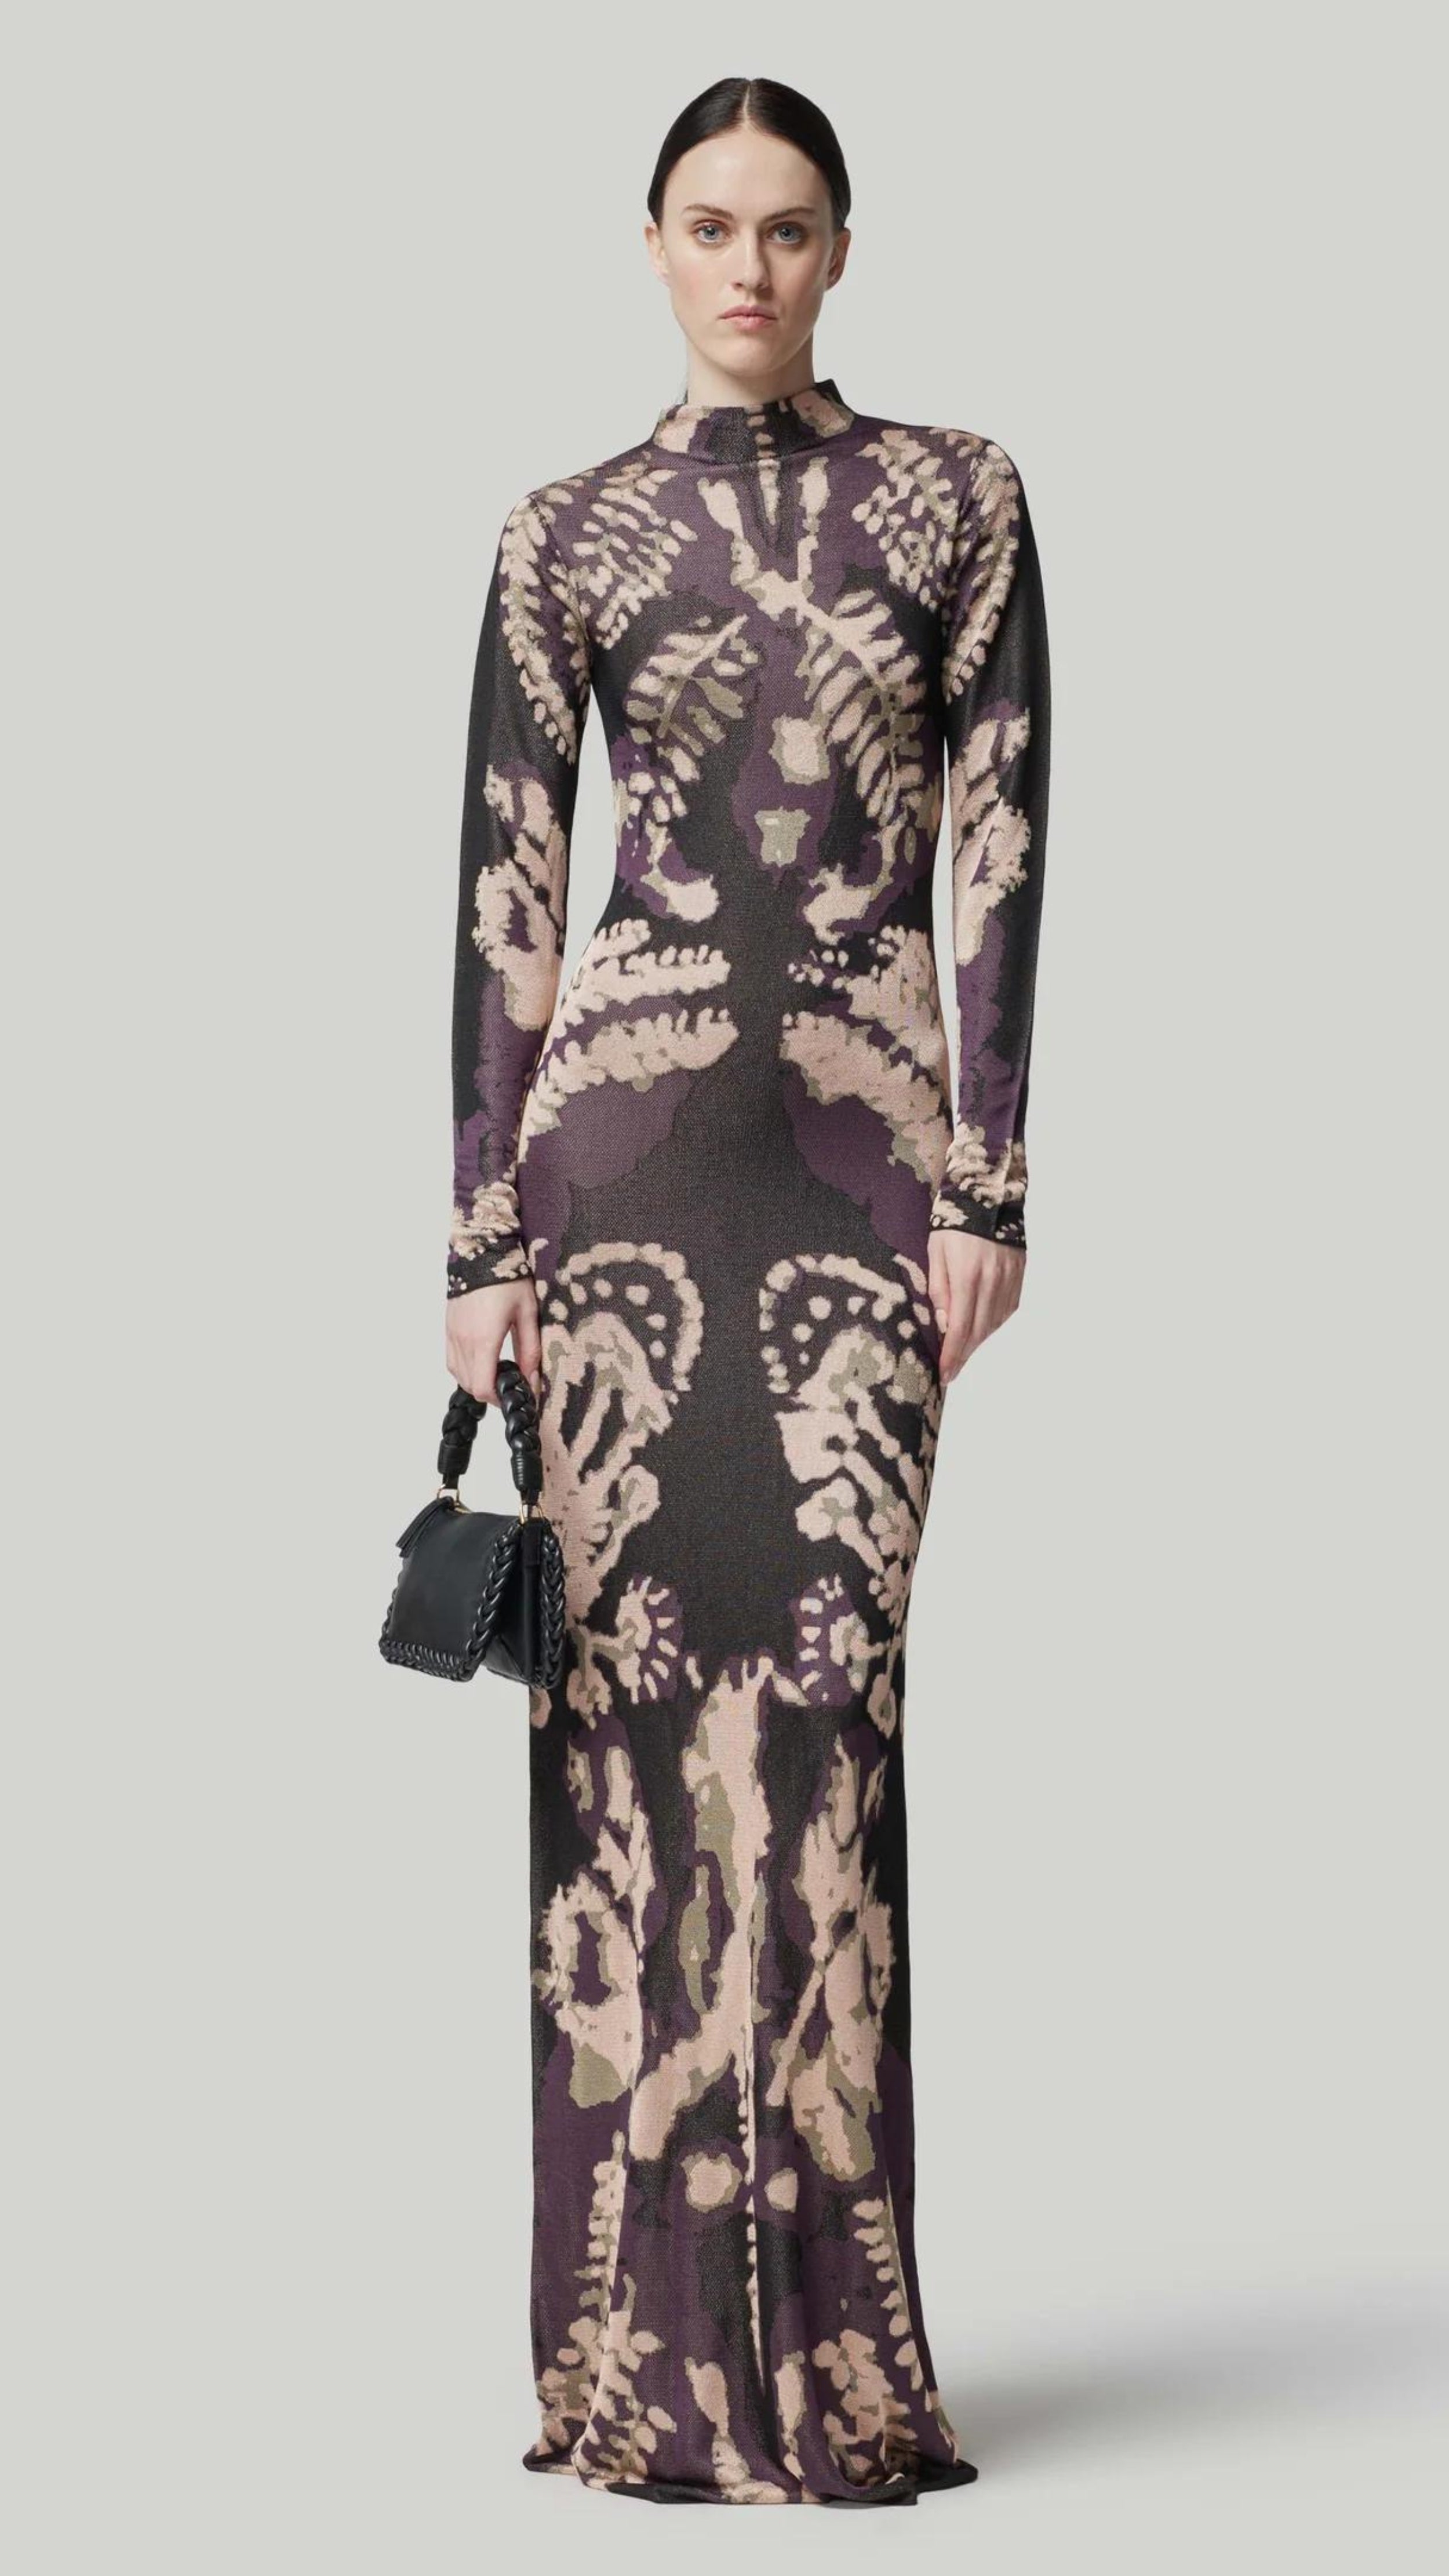 Altuzarra Rhea Dress. Knit dress in the rorschach in deep purple and pale pink. with a mock turtleneck, long sleeves and maxi length. Shown on model facing front